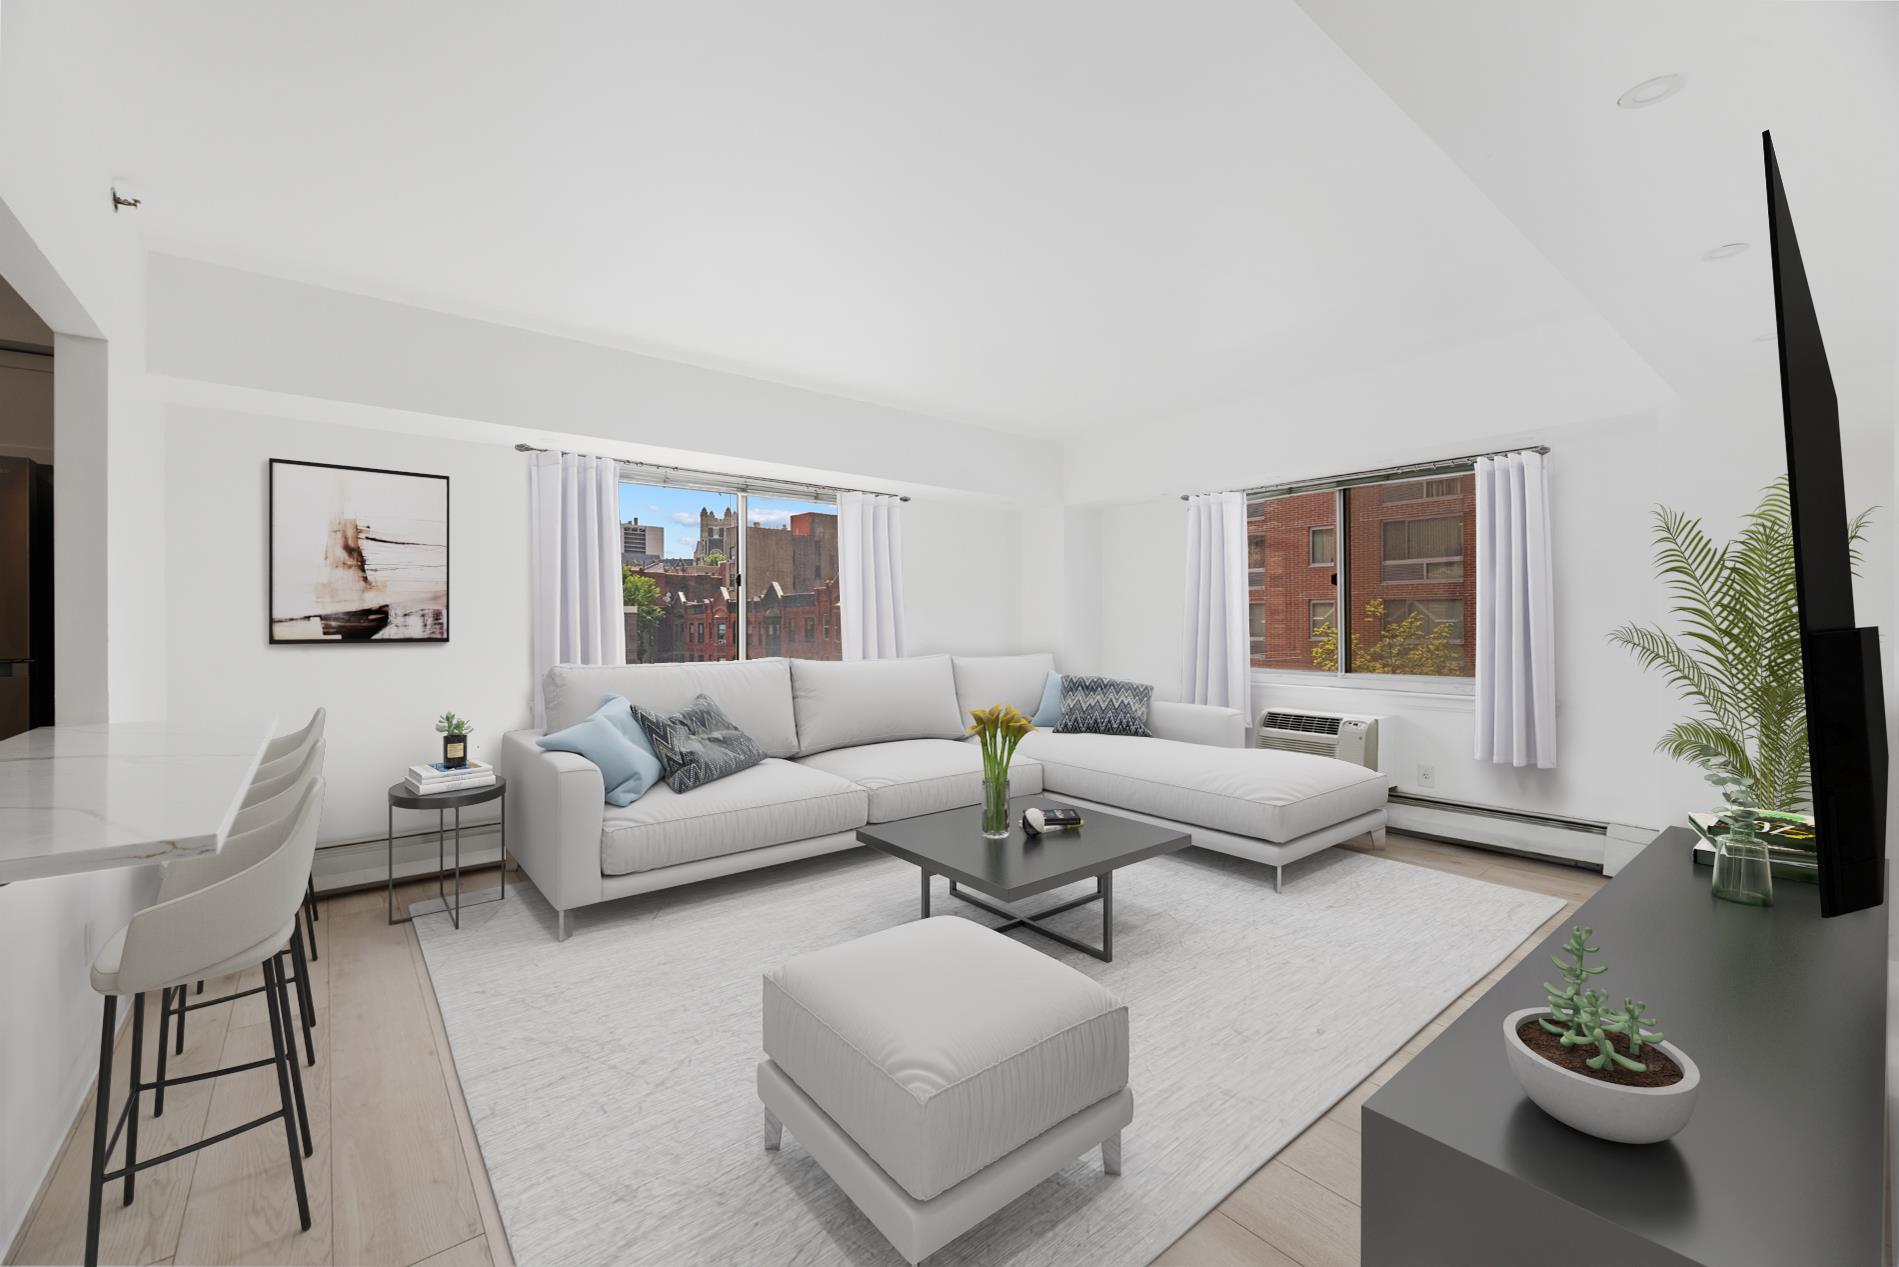 300 West 145th Street 3D, Central Harlem, Upper Manhattan, NYC - 2 Bedrooms  
1.5 Bathrooms  
4 Rooms - 